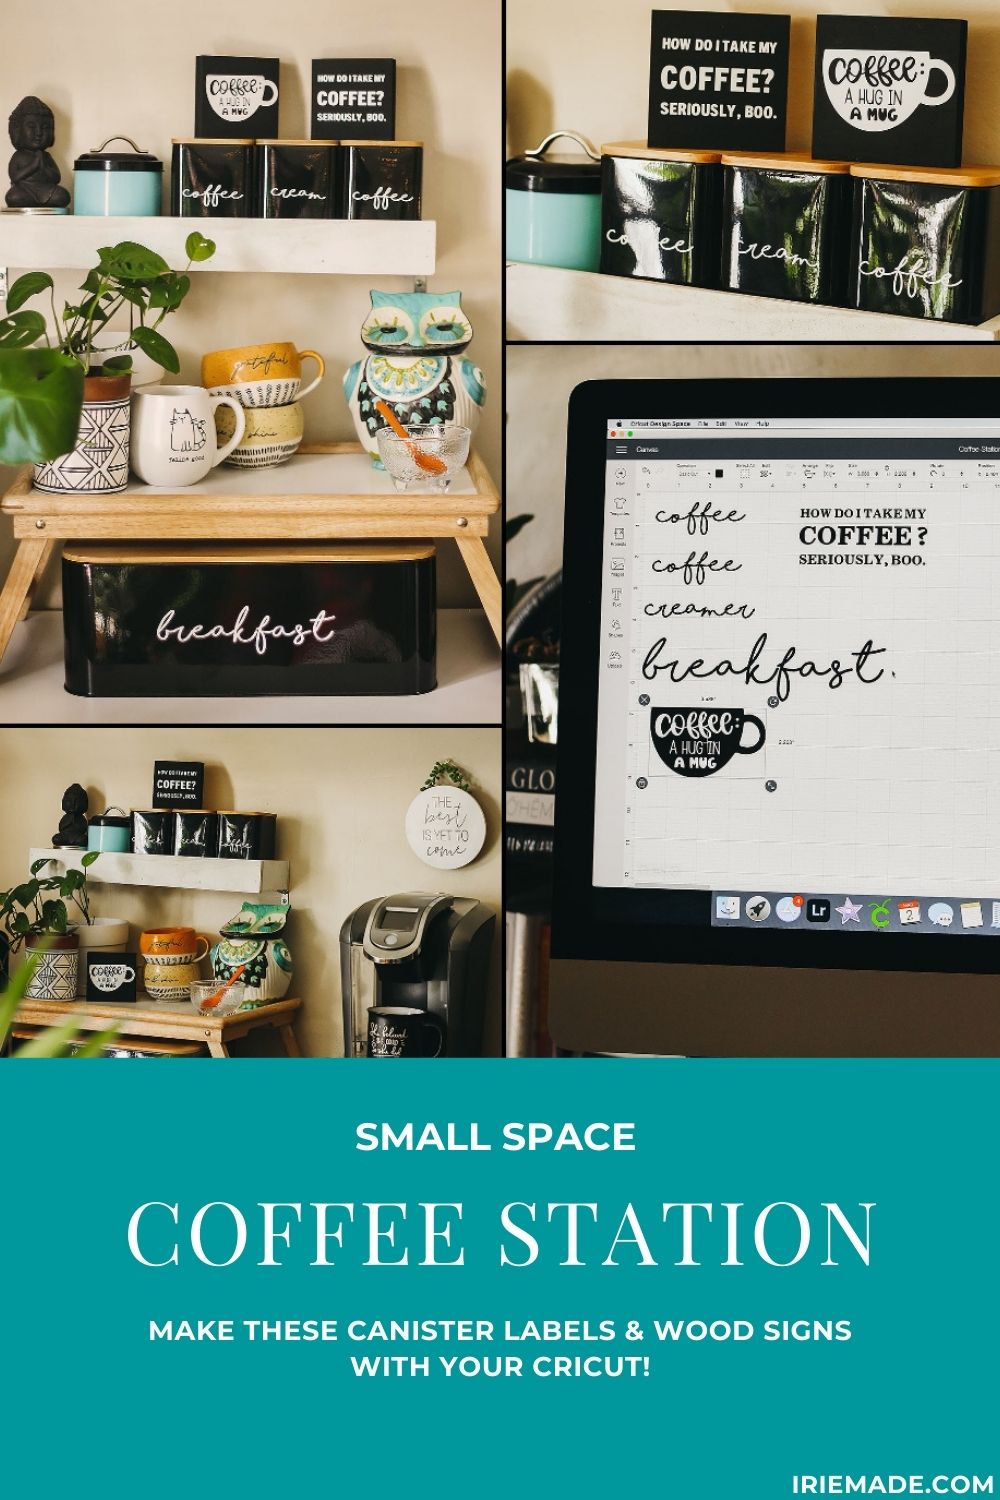 Small Space Coffee Station: Cricut Canister Labels & Wood Signs